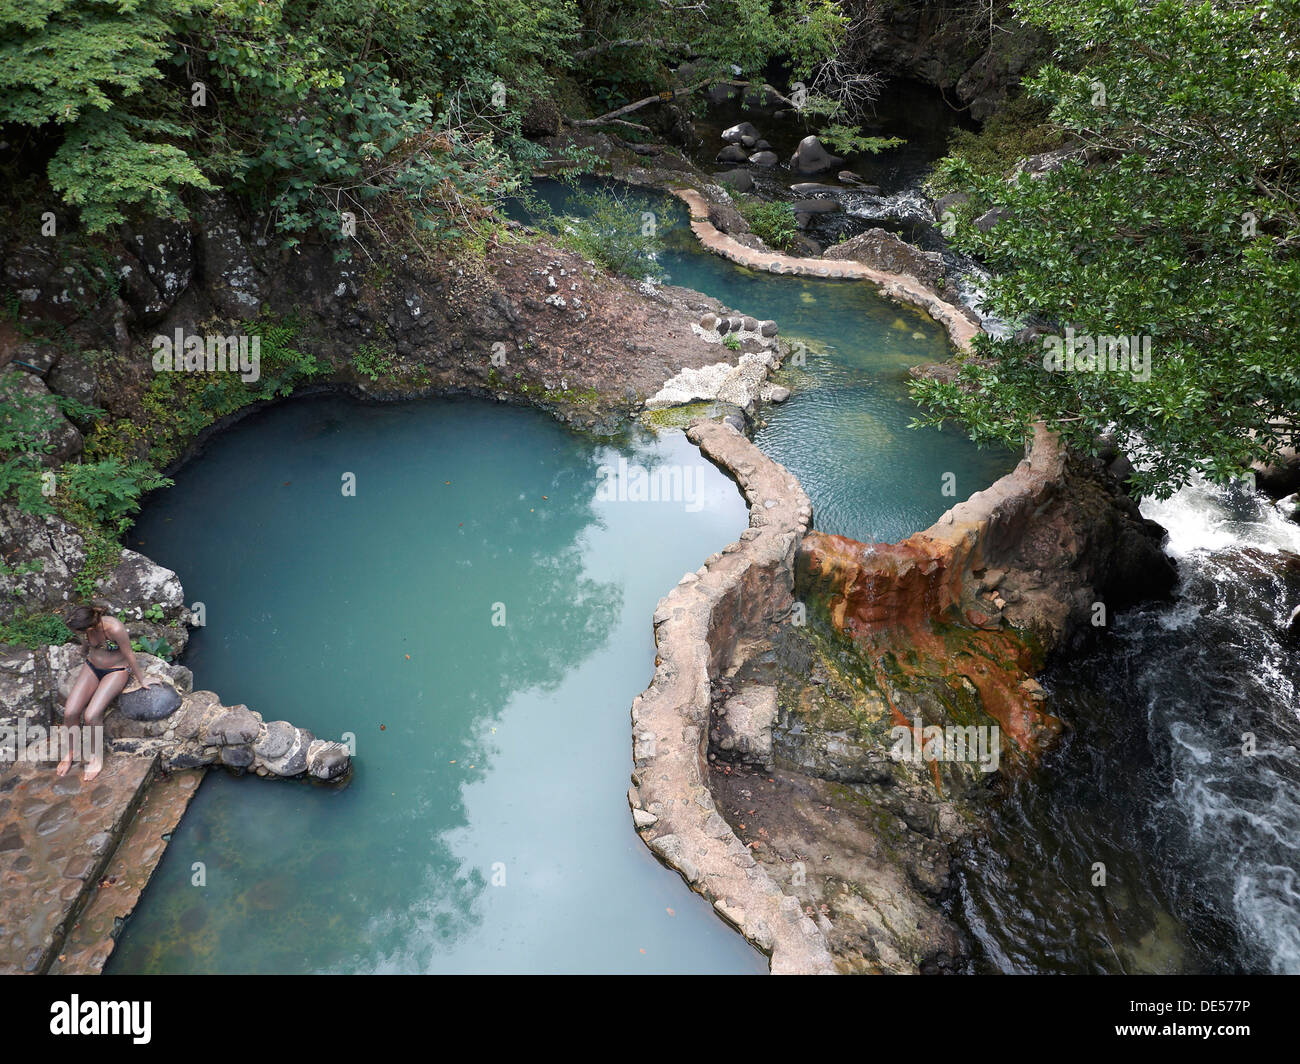 Outdoor pool with hot thermal water, Las Pailas, Ricòn de la Vieja National Park, Province of Guanacaste, Costa Rica Stock Photo